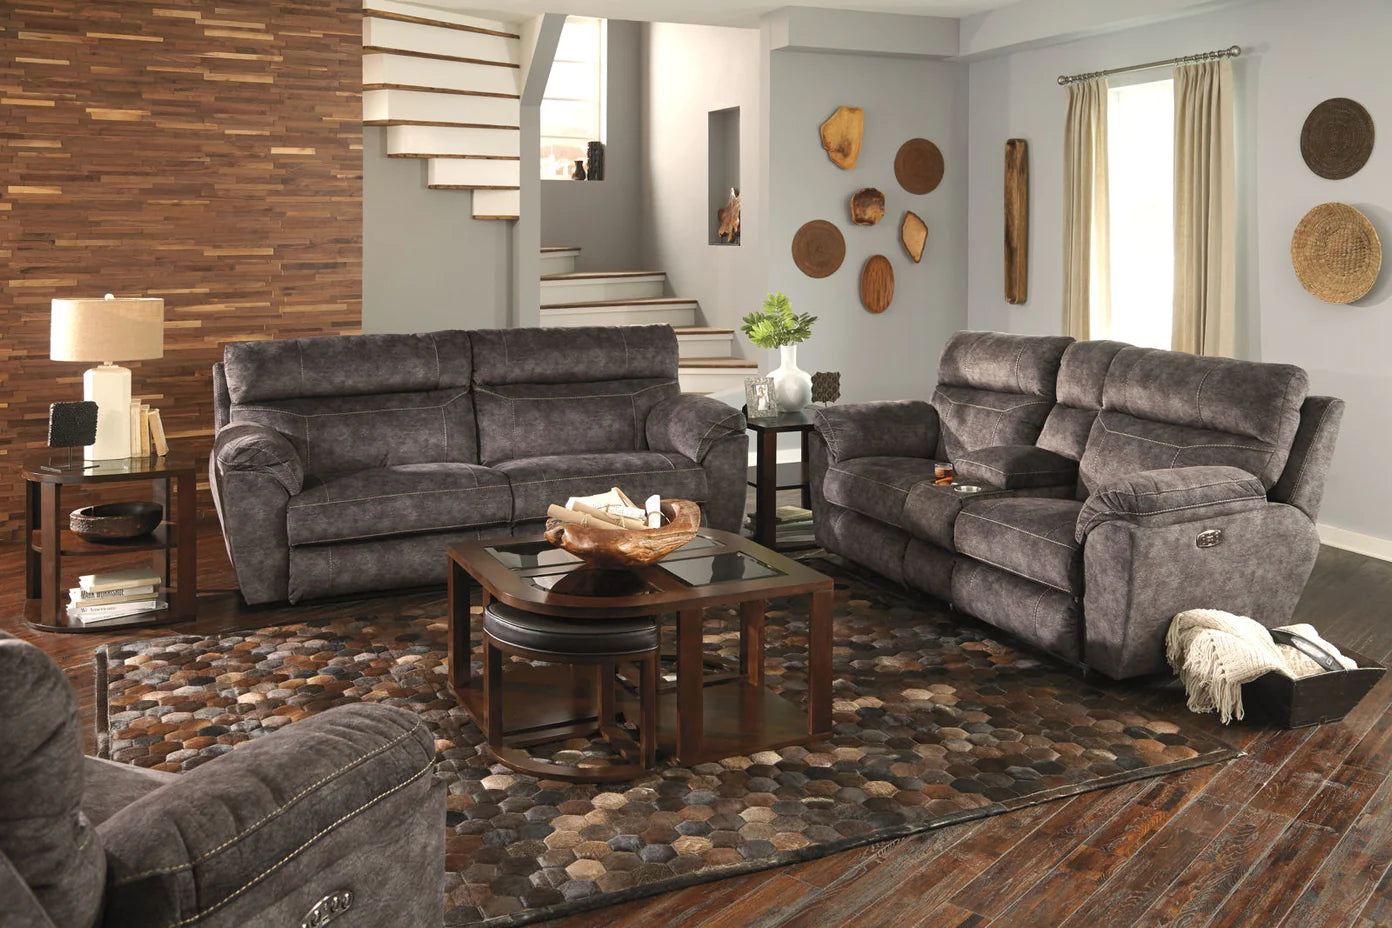 Recliners - The Ultimate Relaxation Stations